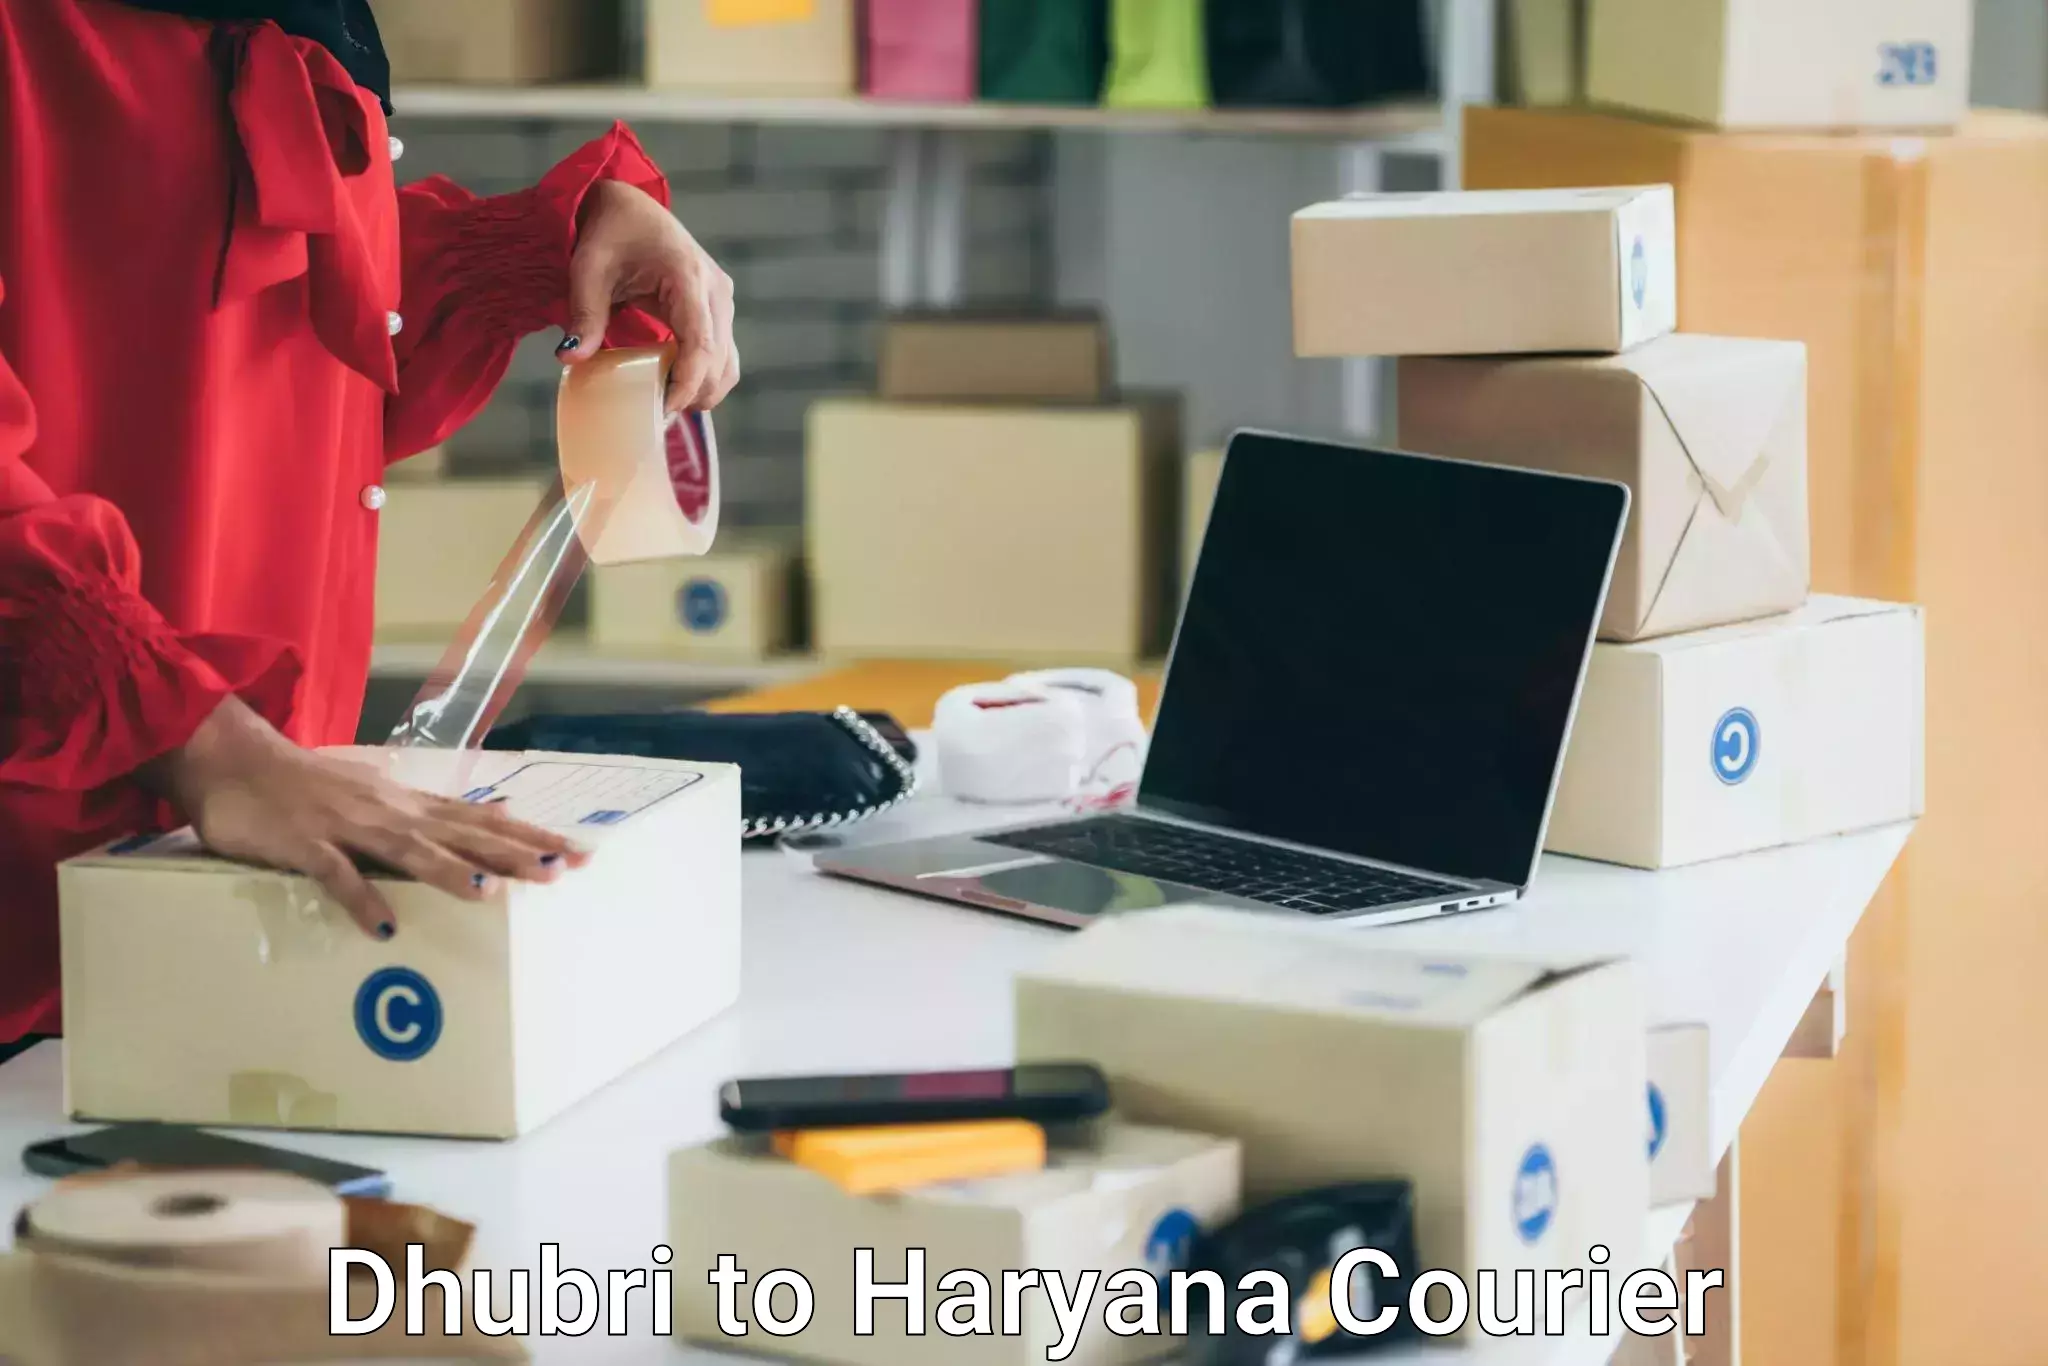 Furniture transport specialists Dhubri to NCR Haryana